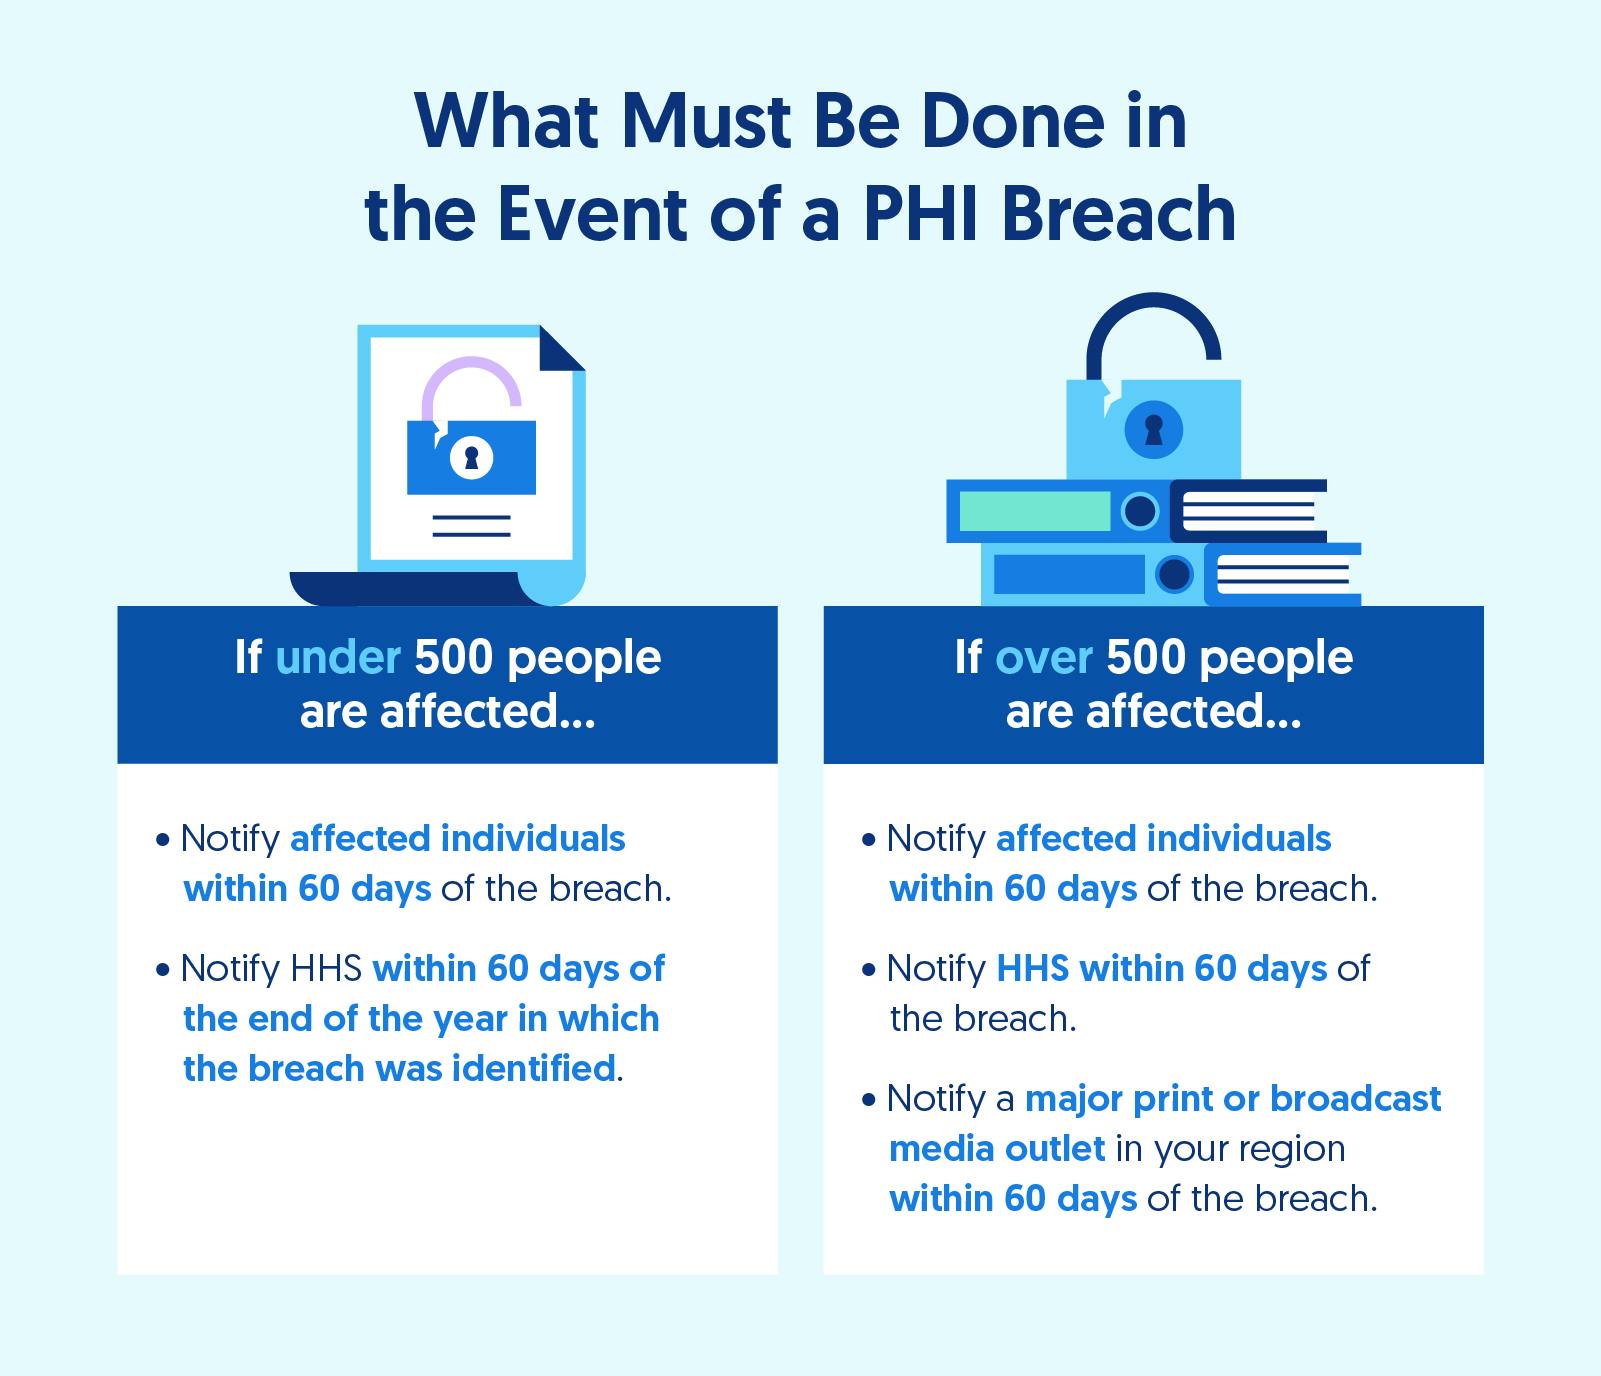 Illustration depicting what must be done in the event of a PHI breach of under 500 people and over 500 people. 